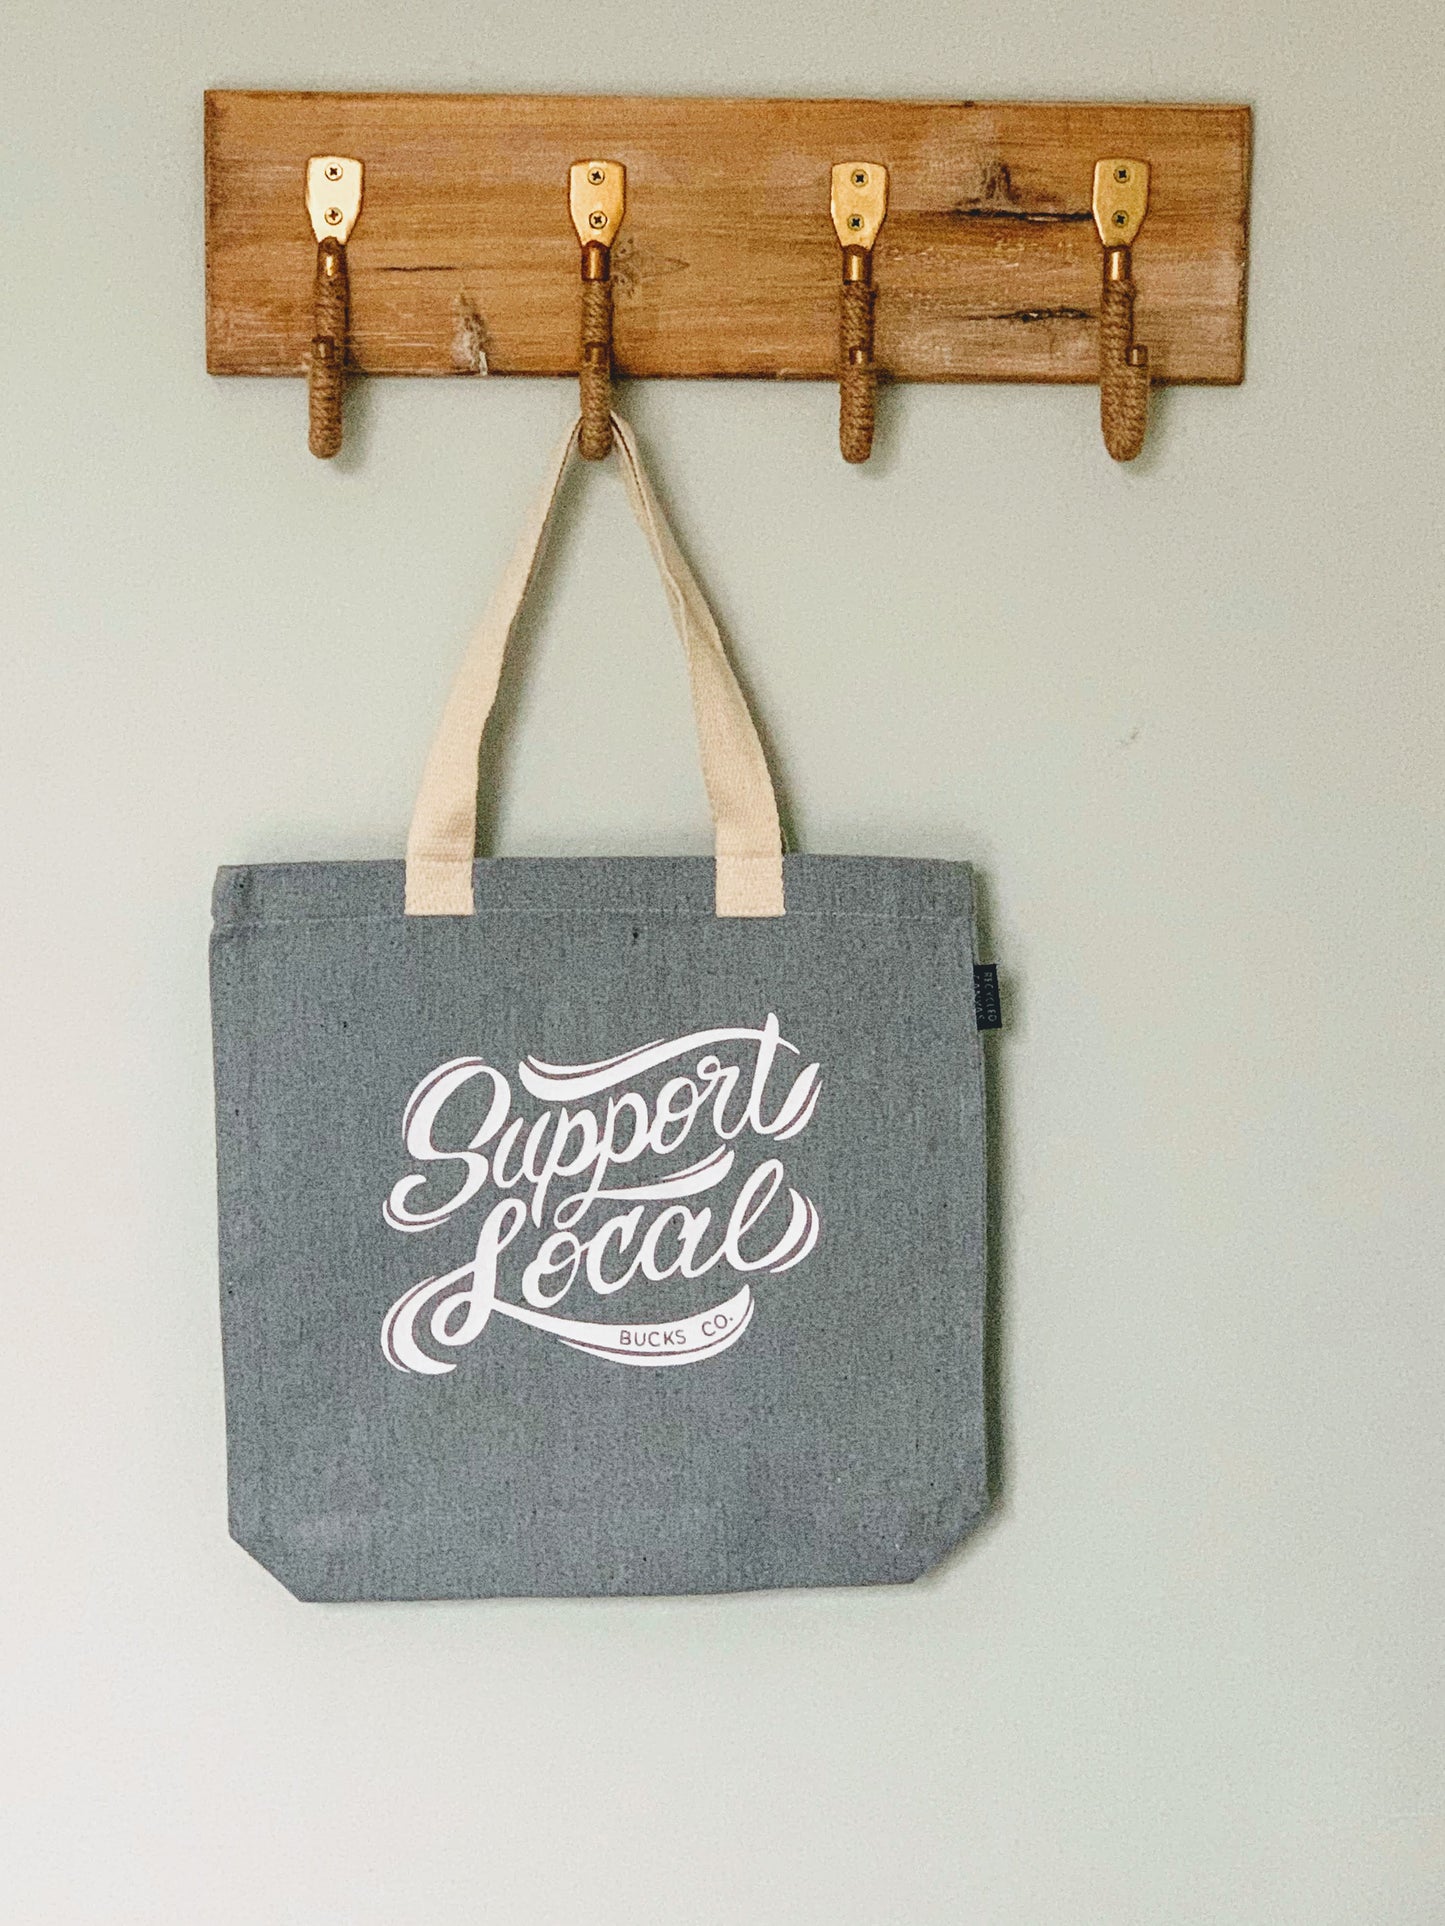 Shop Local Recycled Gray Canvas Tote